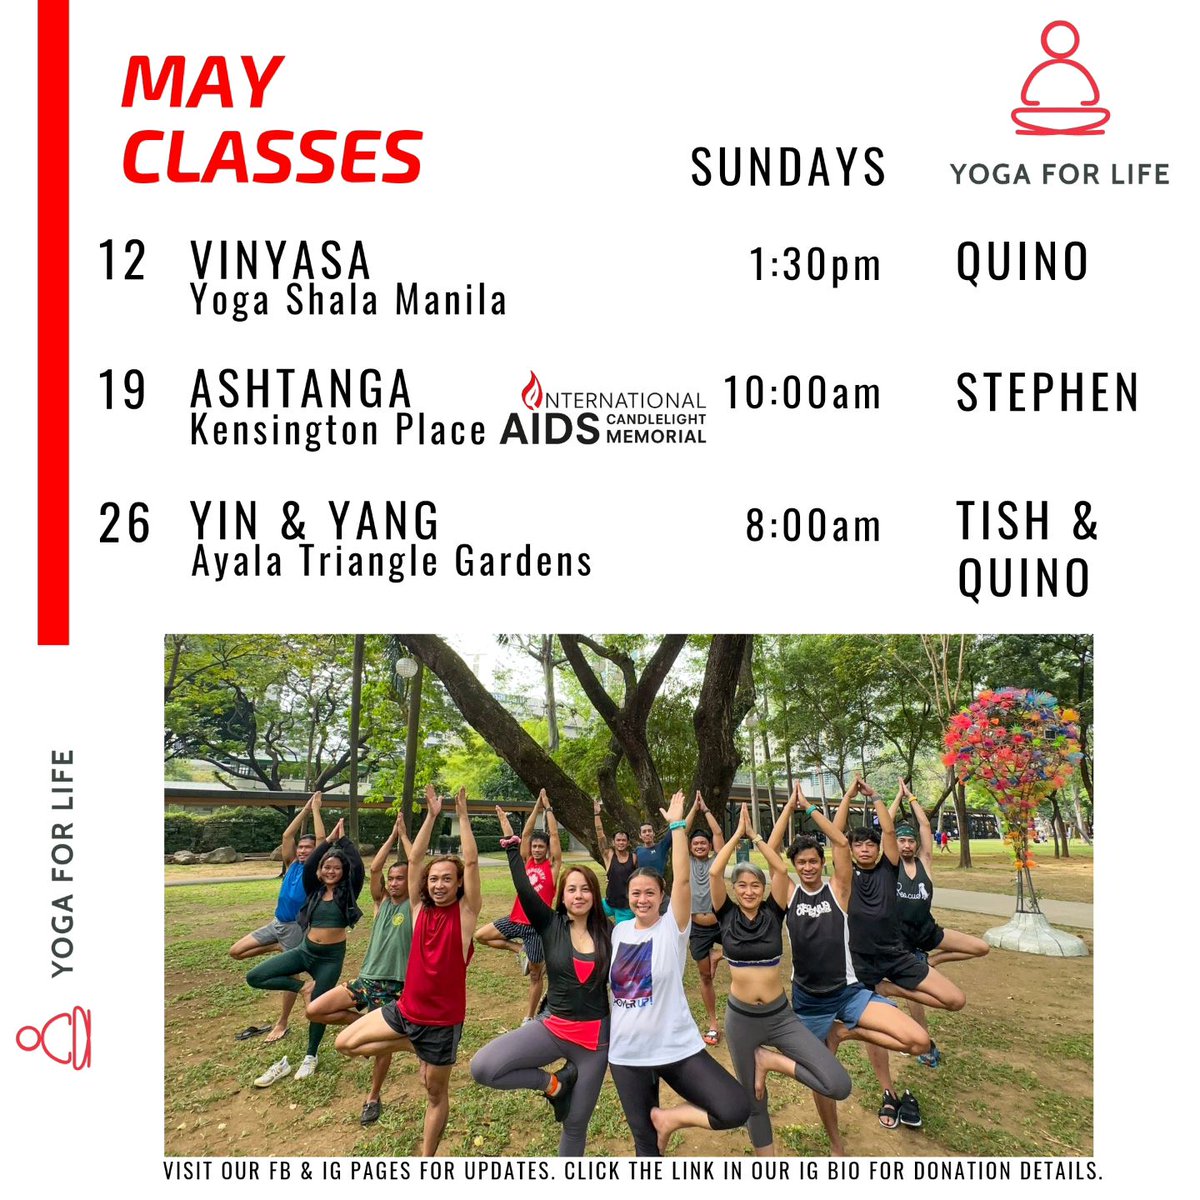 The temperature may be rising, but we're still flowing and breathing. ☀️ We're offering a variety of practices for you at Yoga for Life—all beginner-friendly and open-level. Please note our special classes on May 19 and 26. See you on the mat!